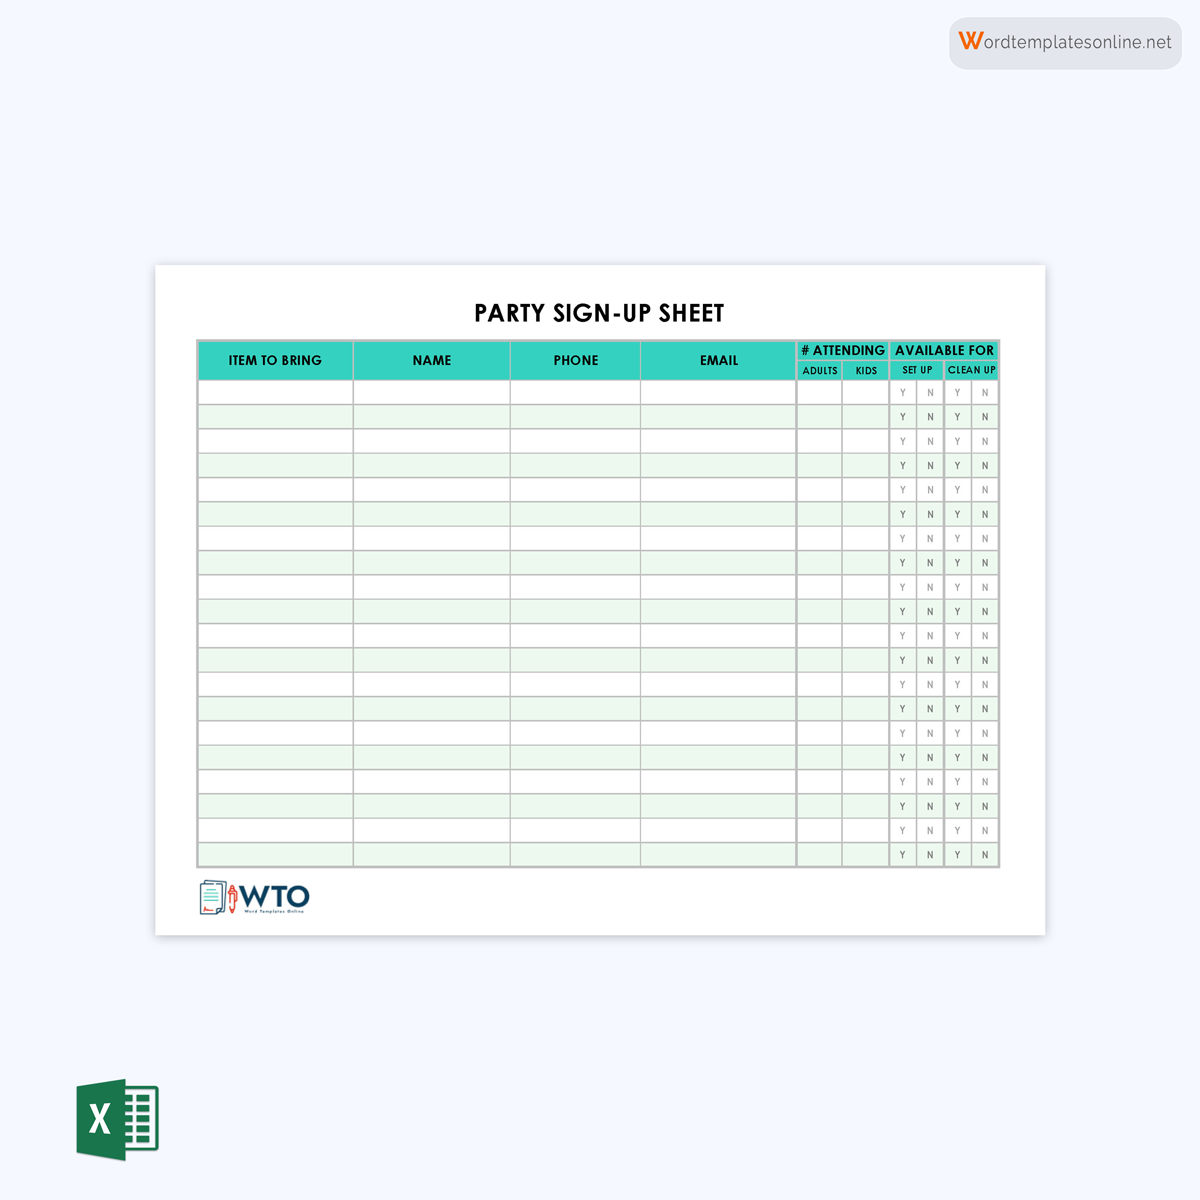 Free Party Sign-Up Sheet in excel